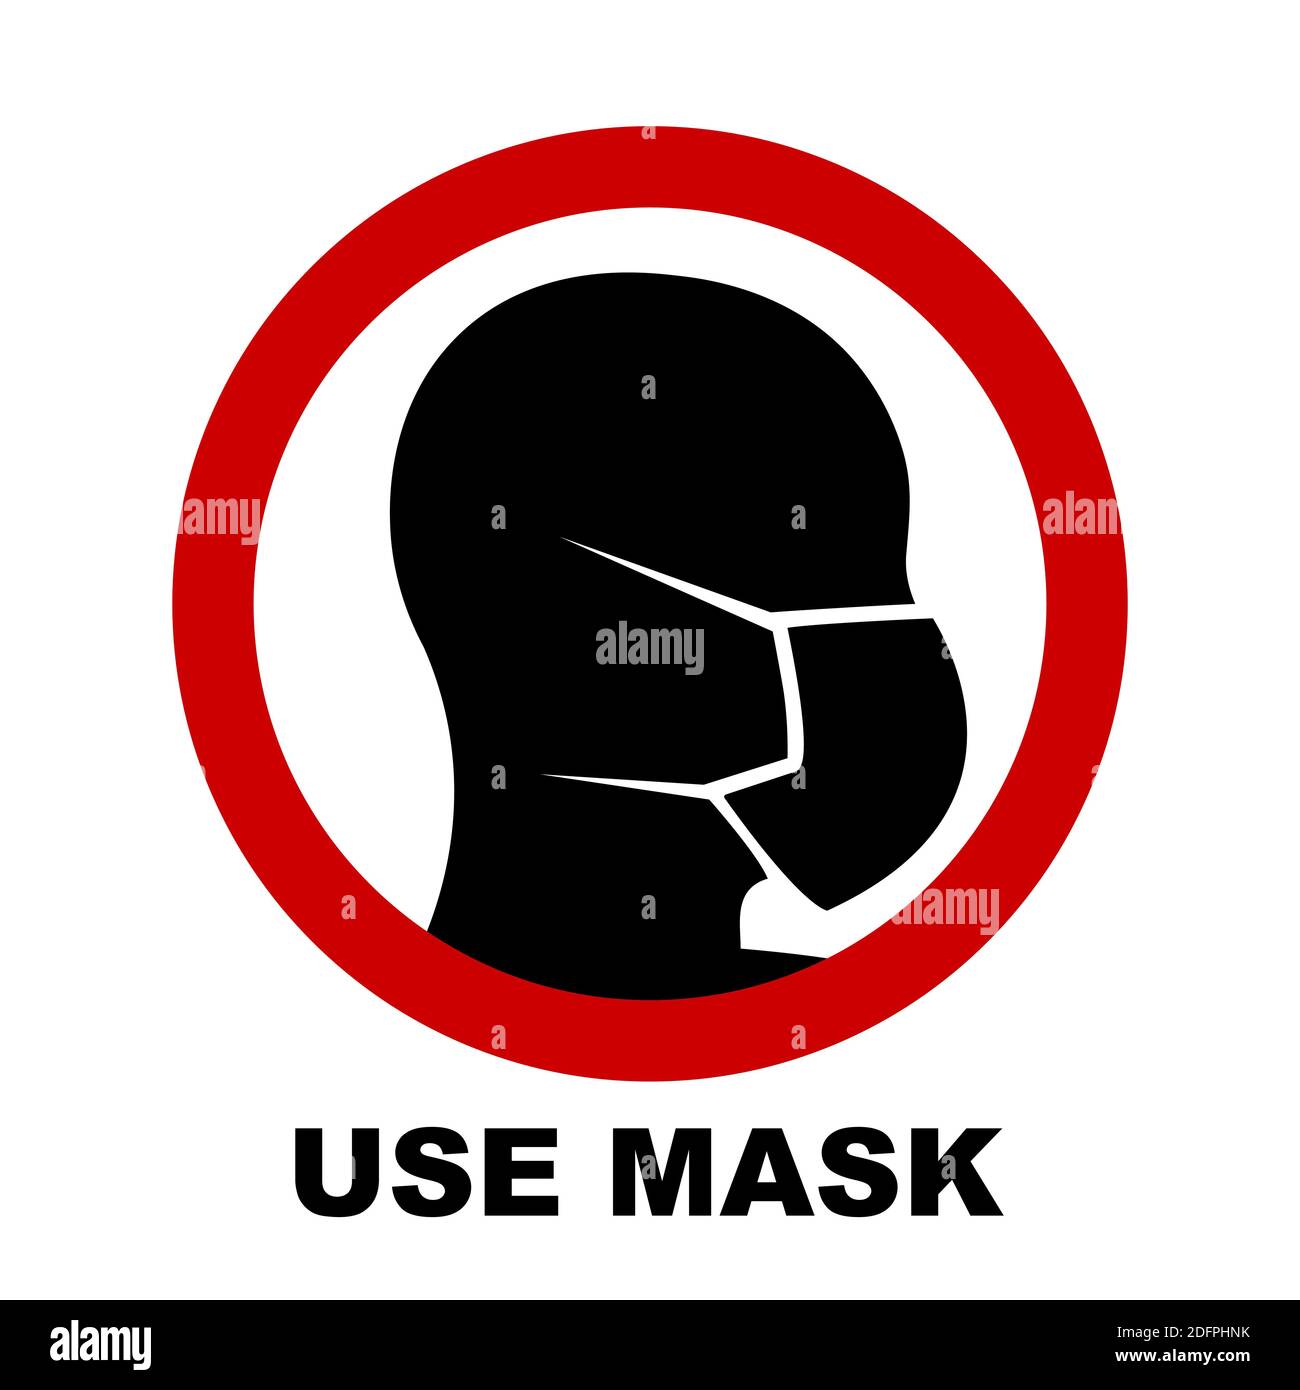 Wear face mask blue sign. Silhouette of head with medical mask on face in red circle. Vector Illustration. Stock Vector